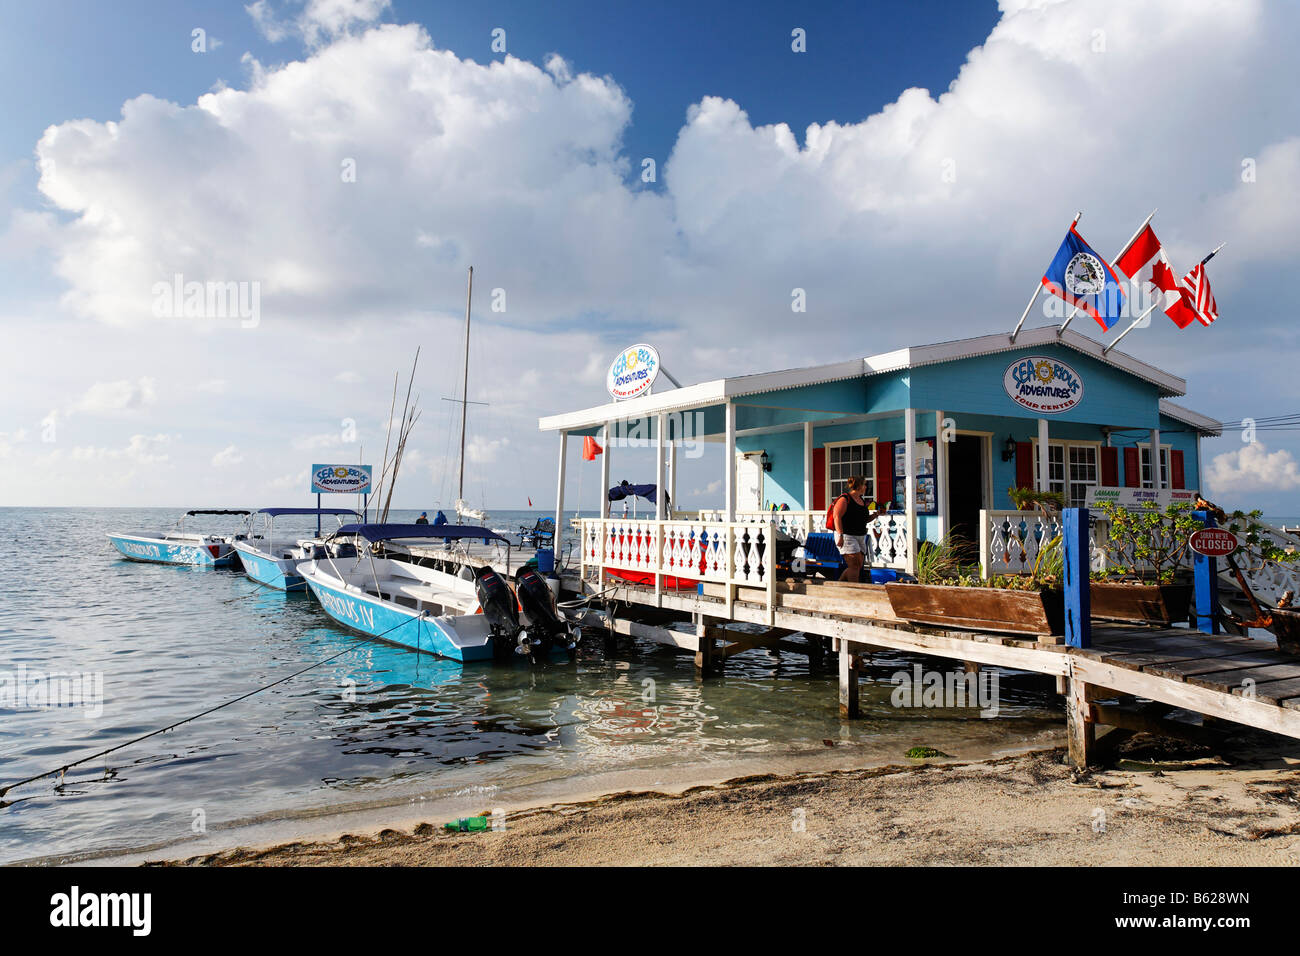 Restaurant on a pier in the ocean of San Pedro, Ambergris Cay Island, Belize, Central America, Caribbean Stock Photo